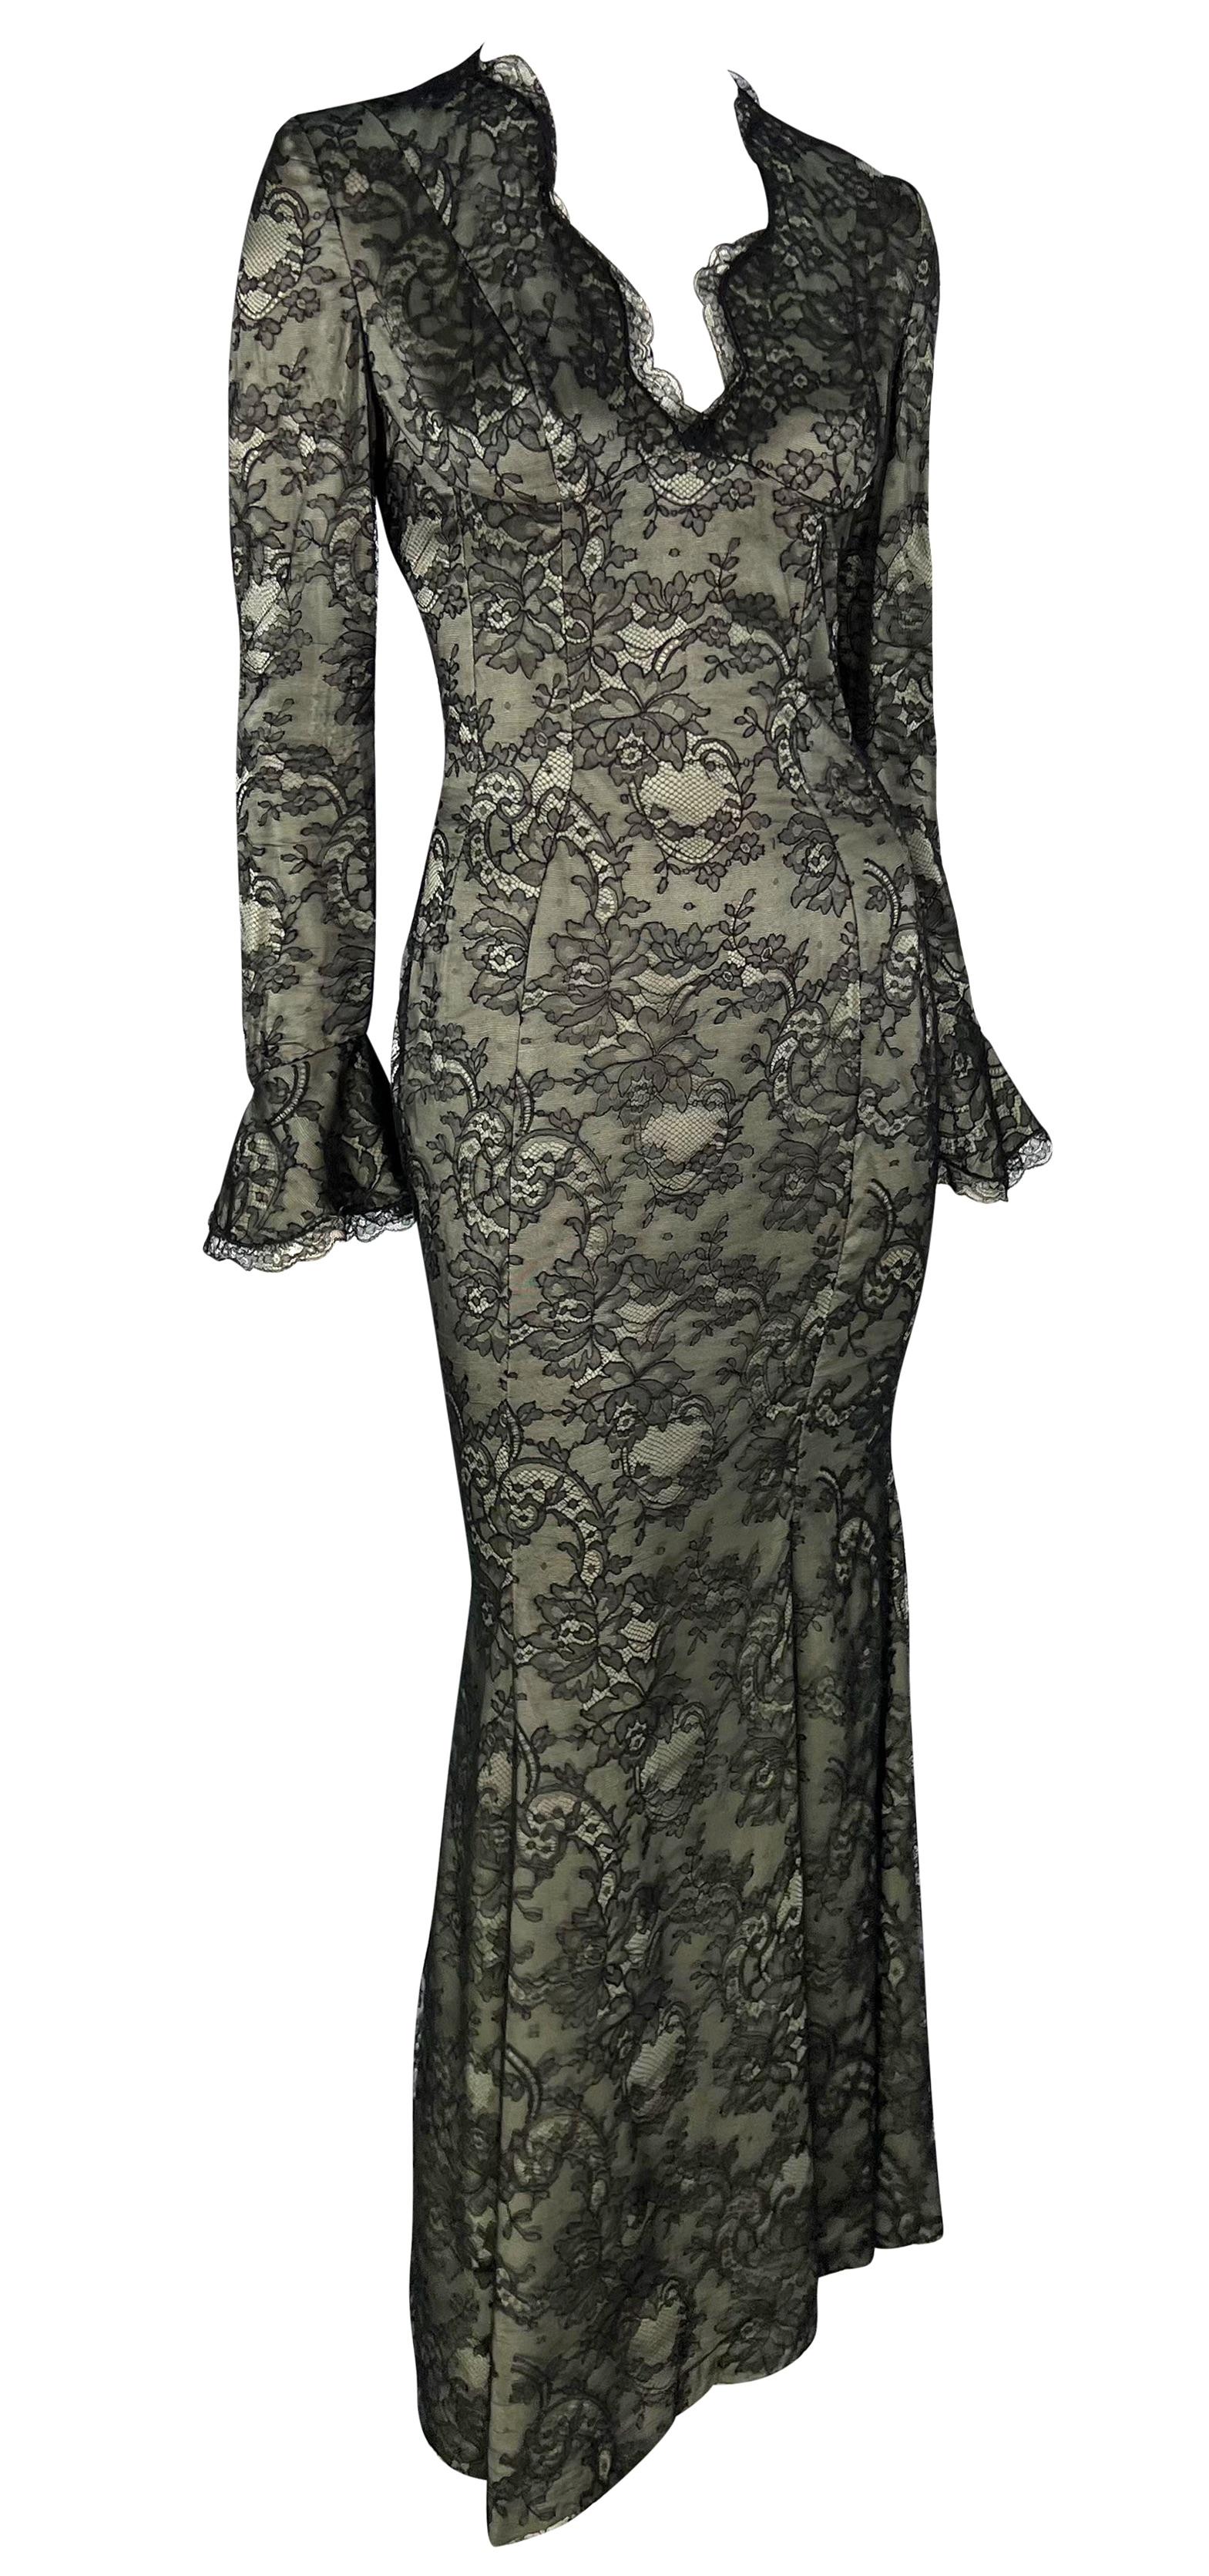 S/S 1995 Thierry Mugler Plunging Taupe Satin Black Floral Lace Overlay Gown For Sale 3